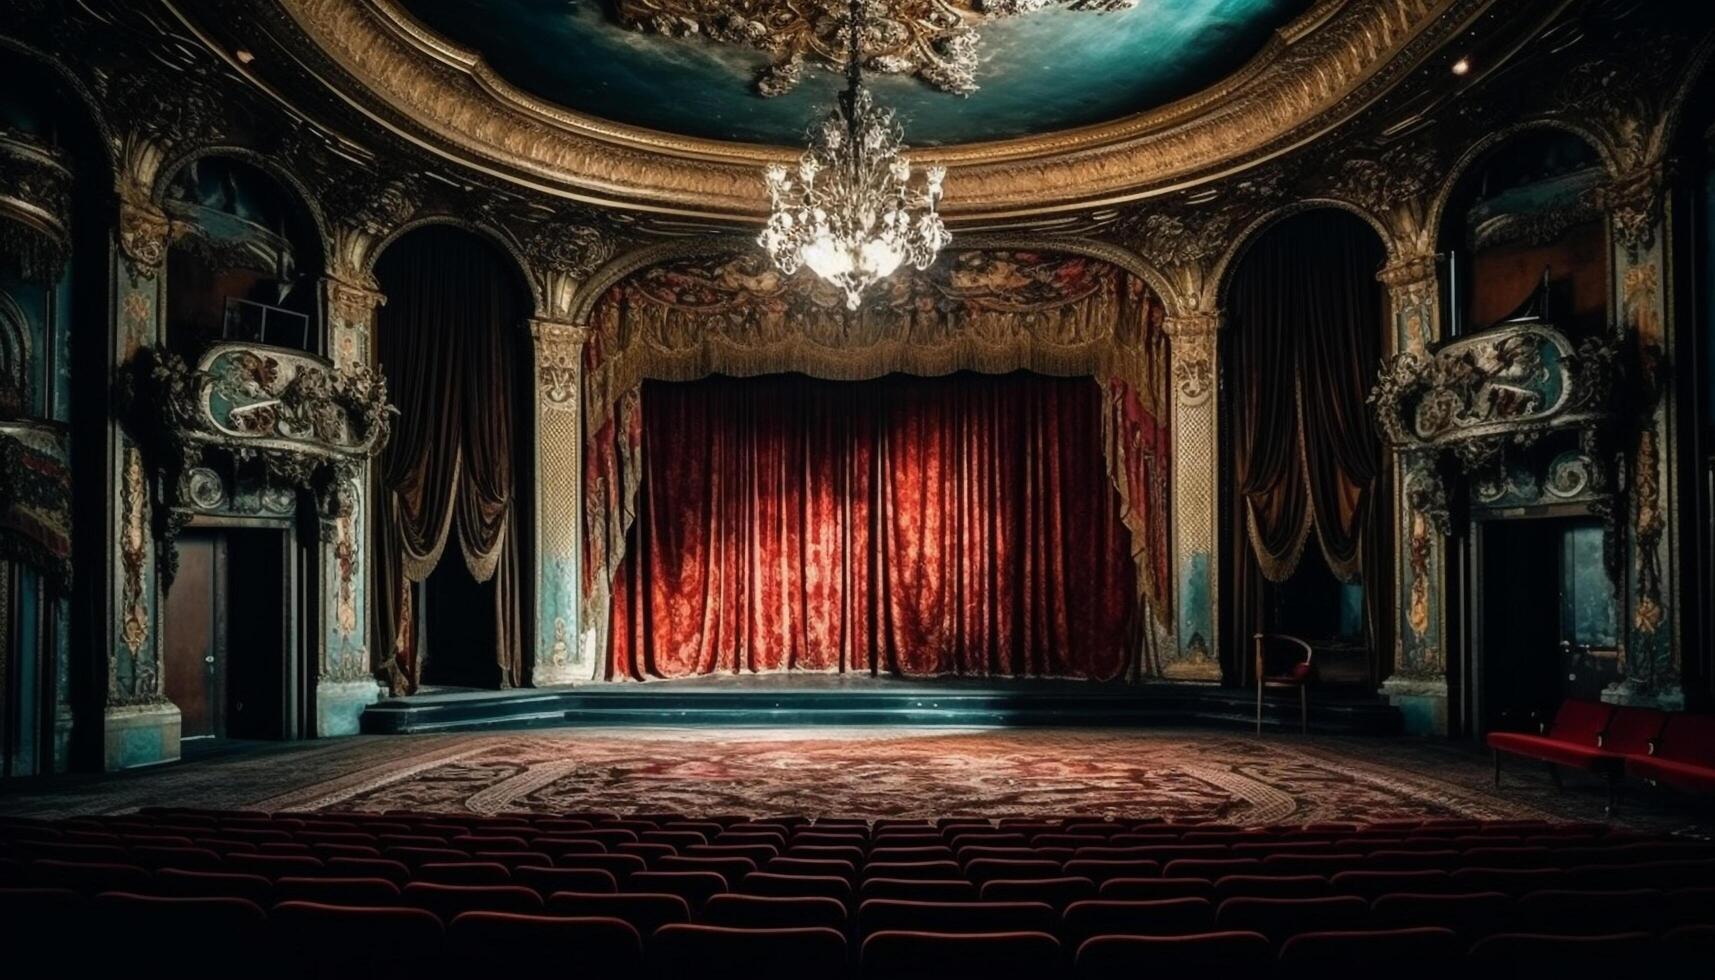 The illuminated stage theater exudes elegance with velvet curtains generated by AI photo